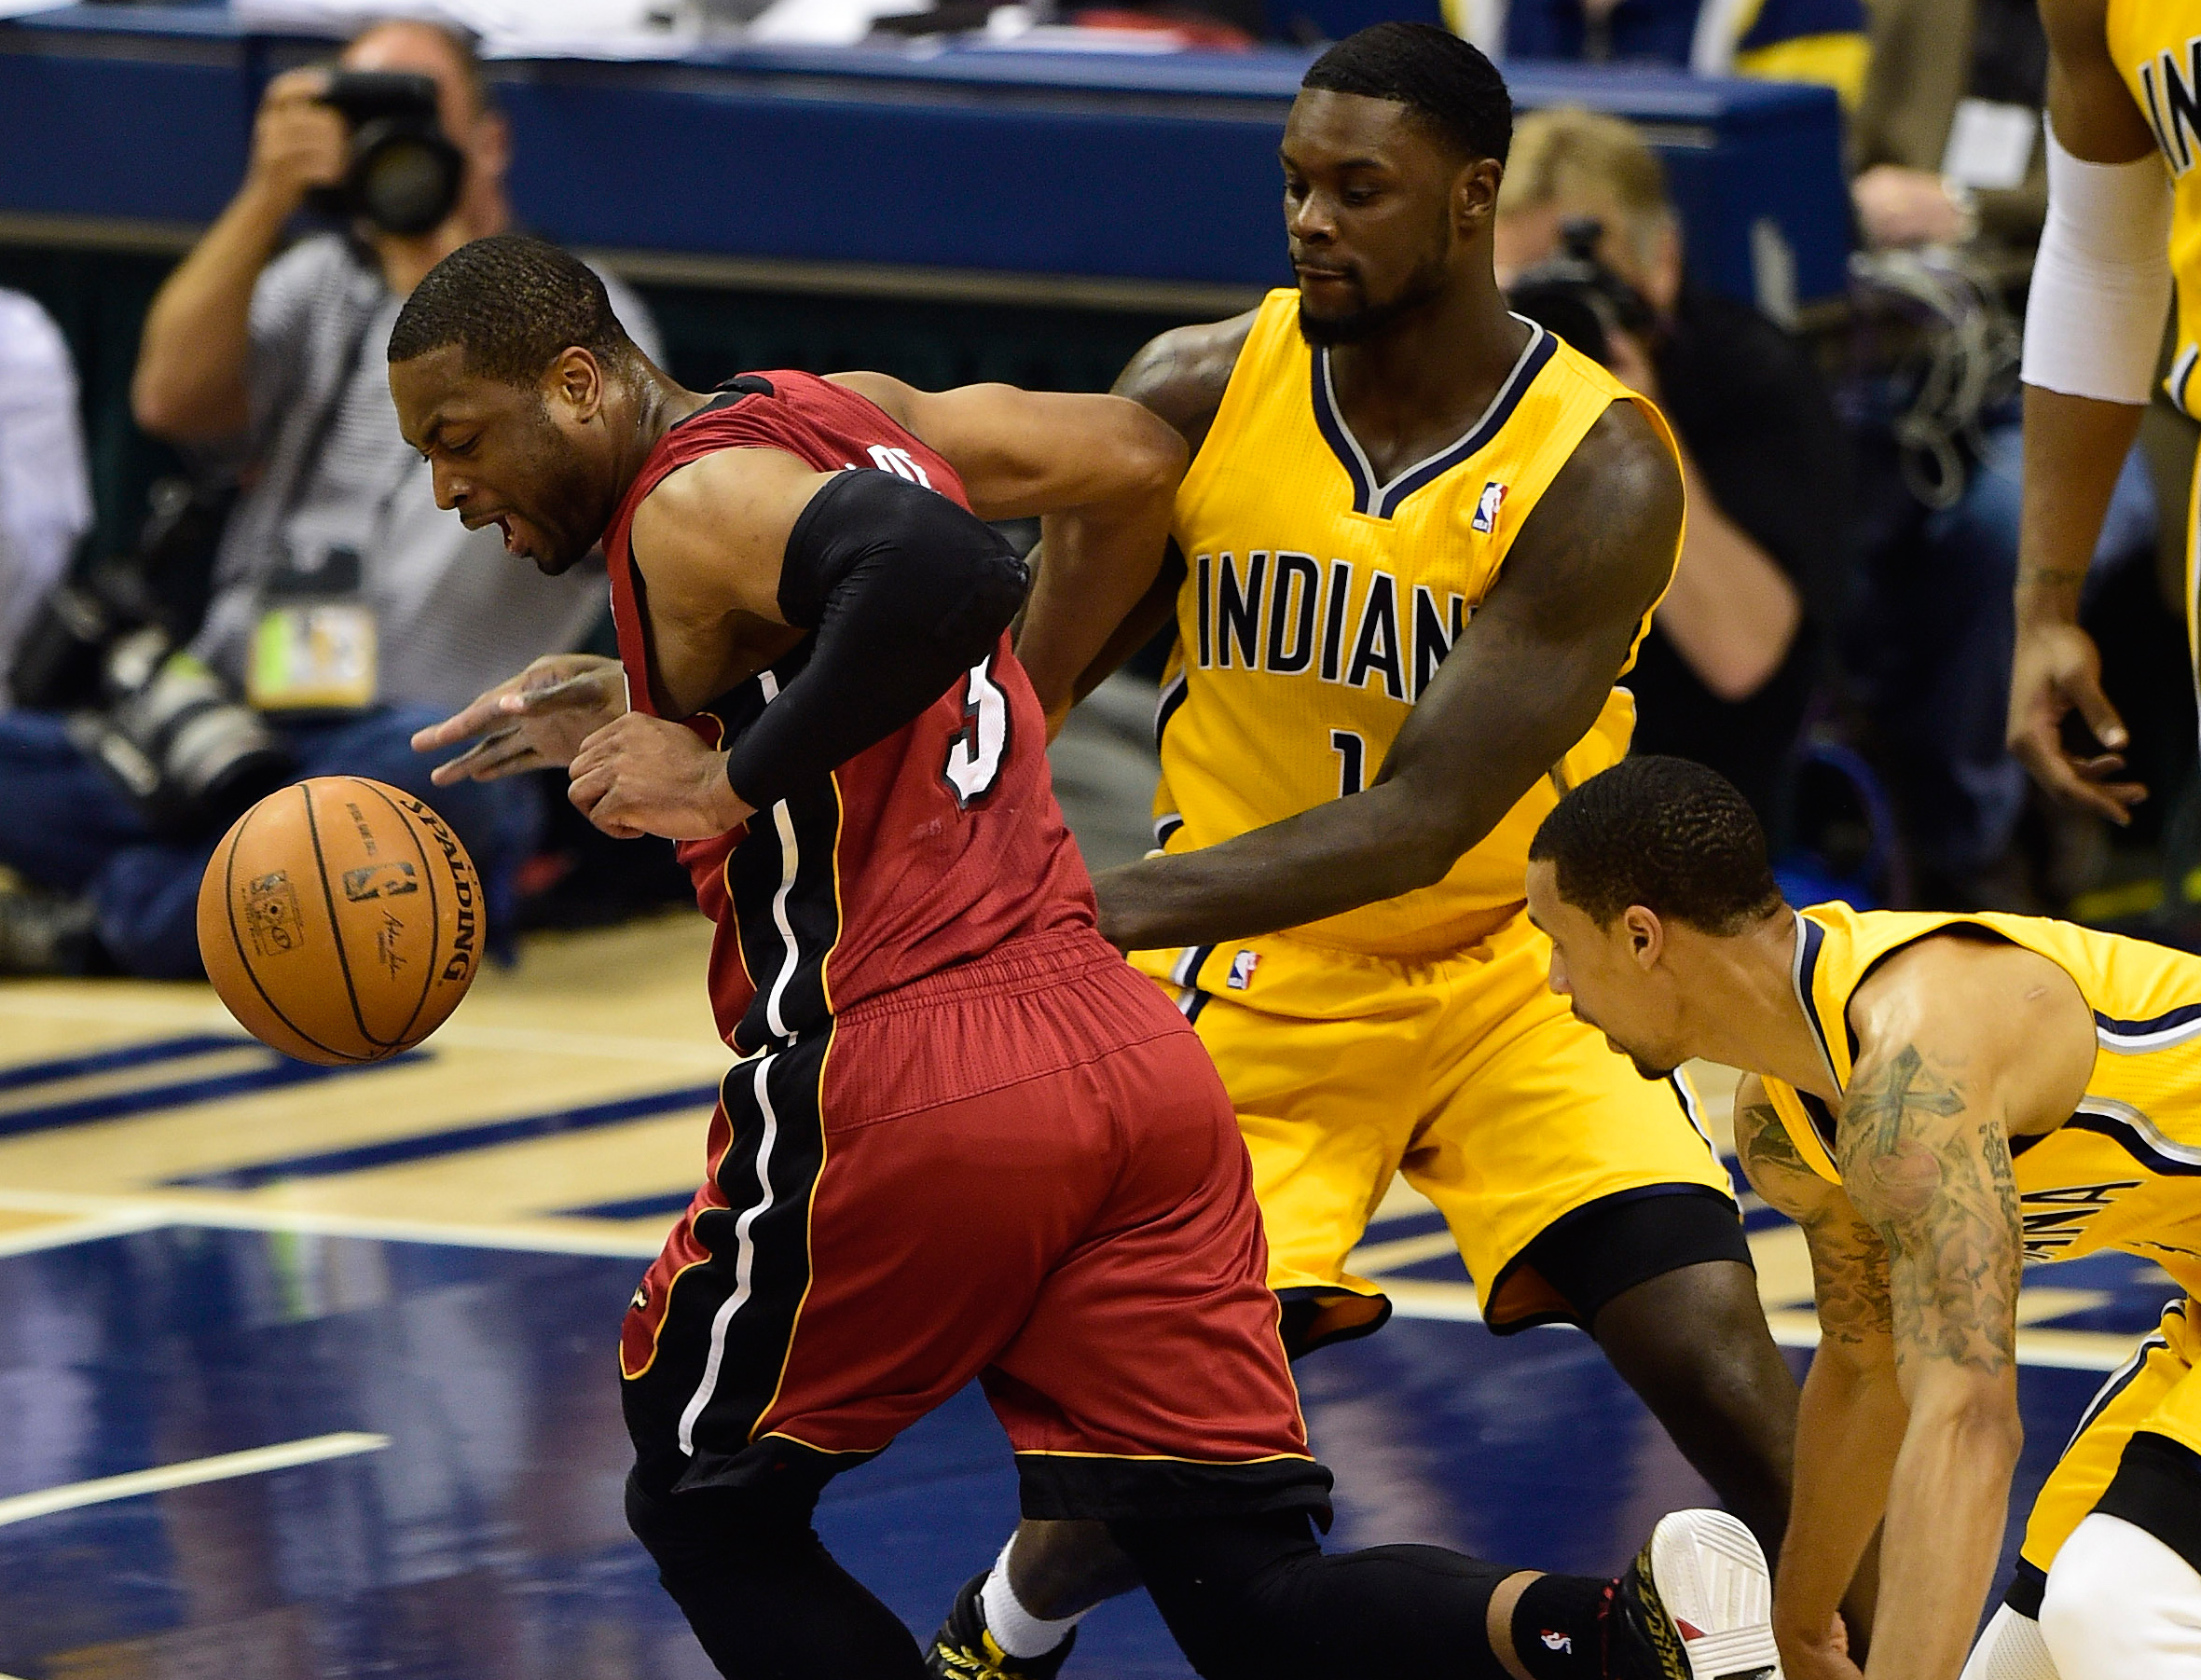 Marc Lebryk, USA Today: Stephenson may need to step up if George is out. 